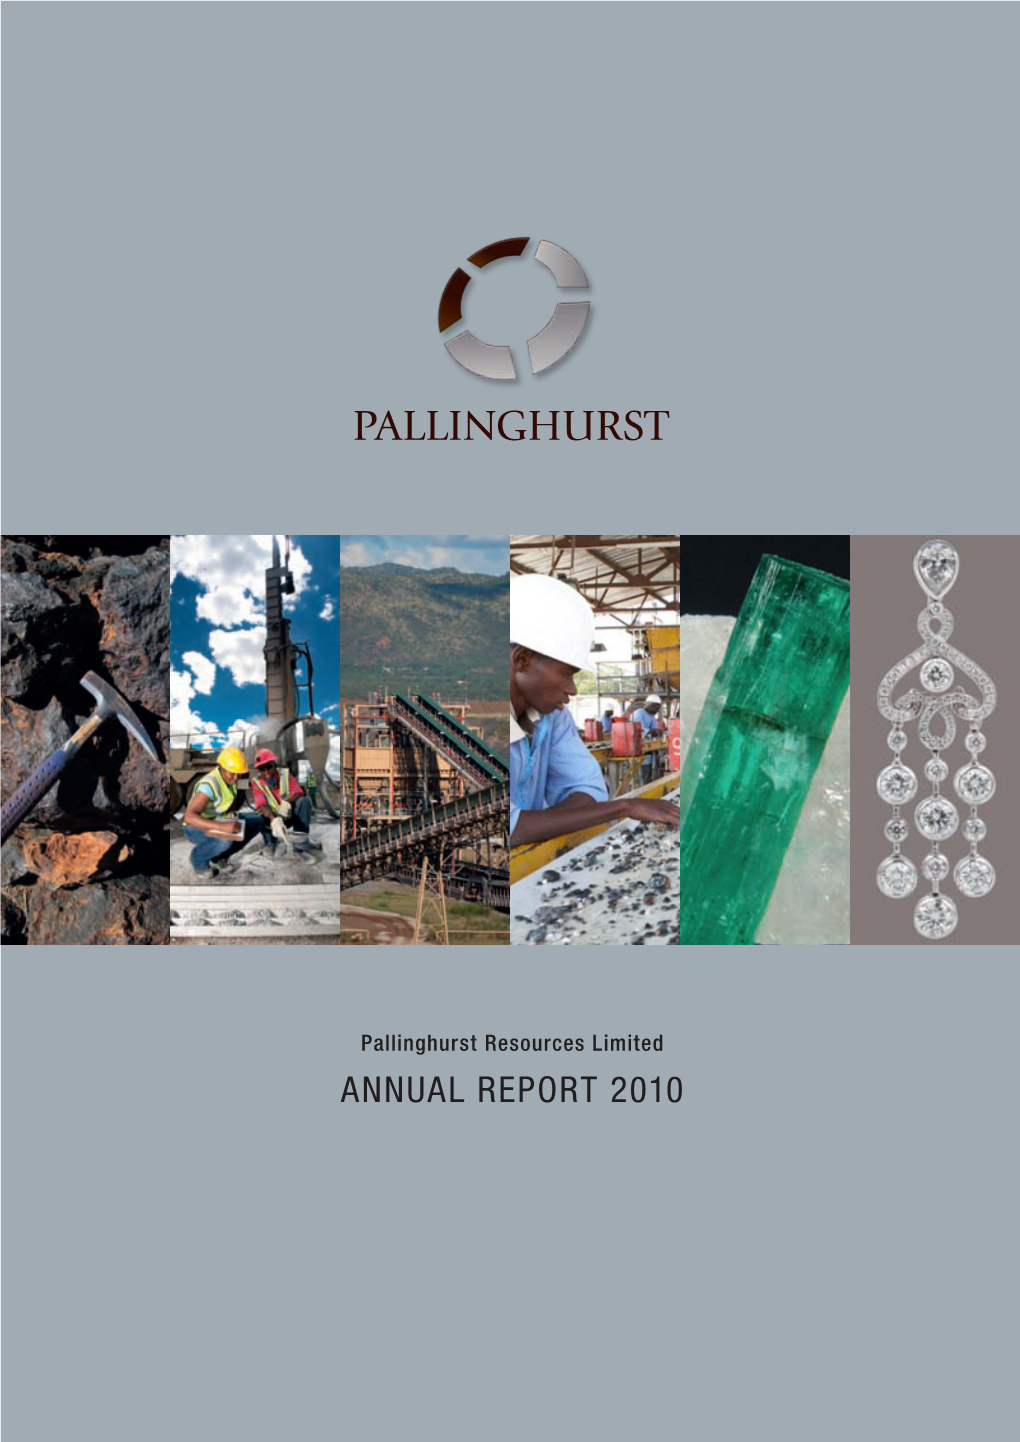 Pallinghurst Resources Limited ANNUAL REPORT 2010 OVERVIEW Chairman’S Welcome 1 Delivering Our Vision 2 Our Value 4 Potential New Investments 5 01 Our World 6